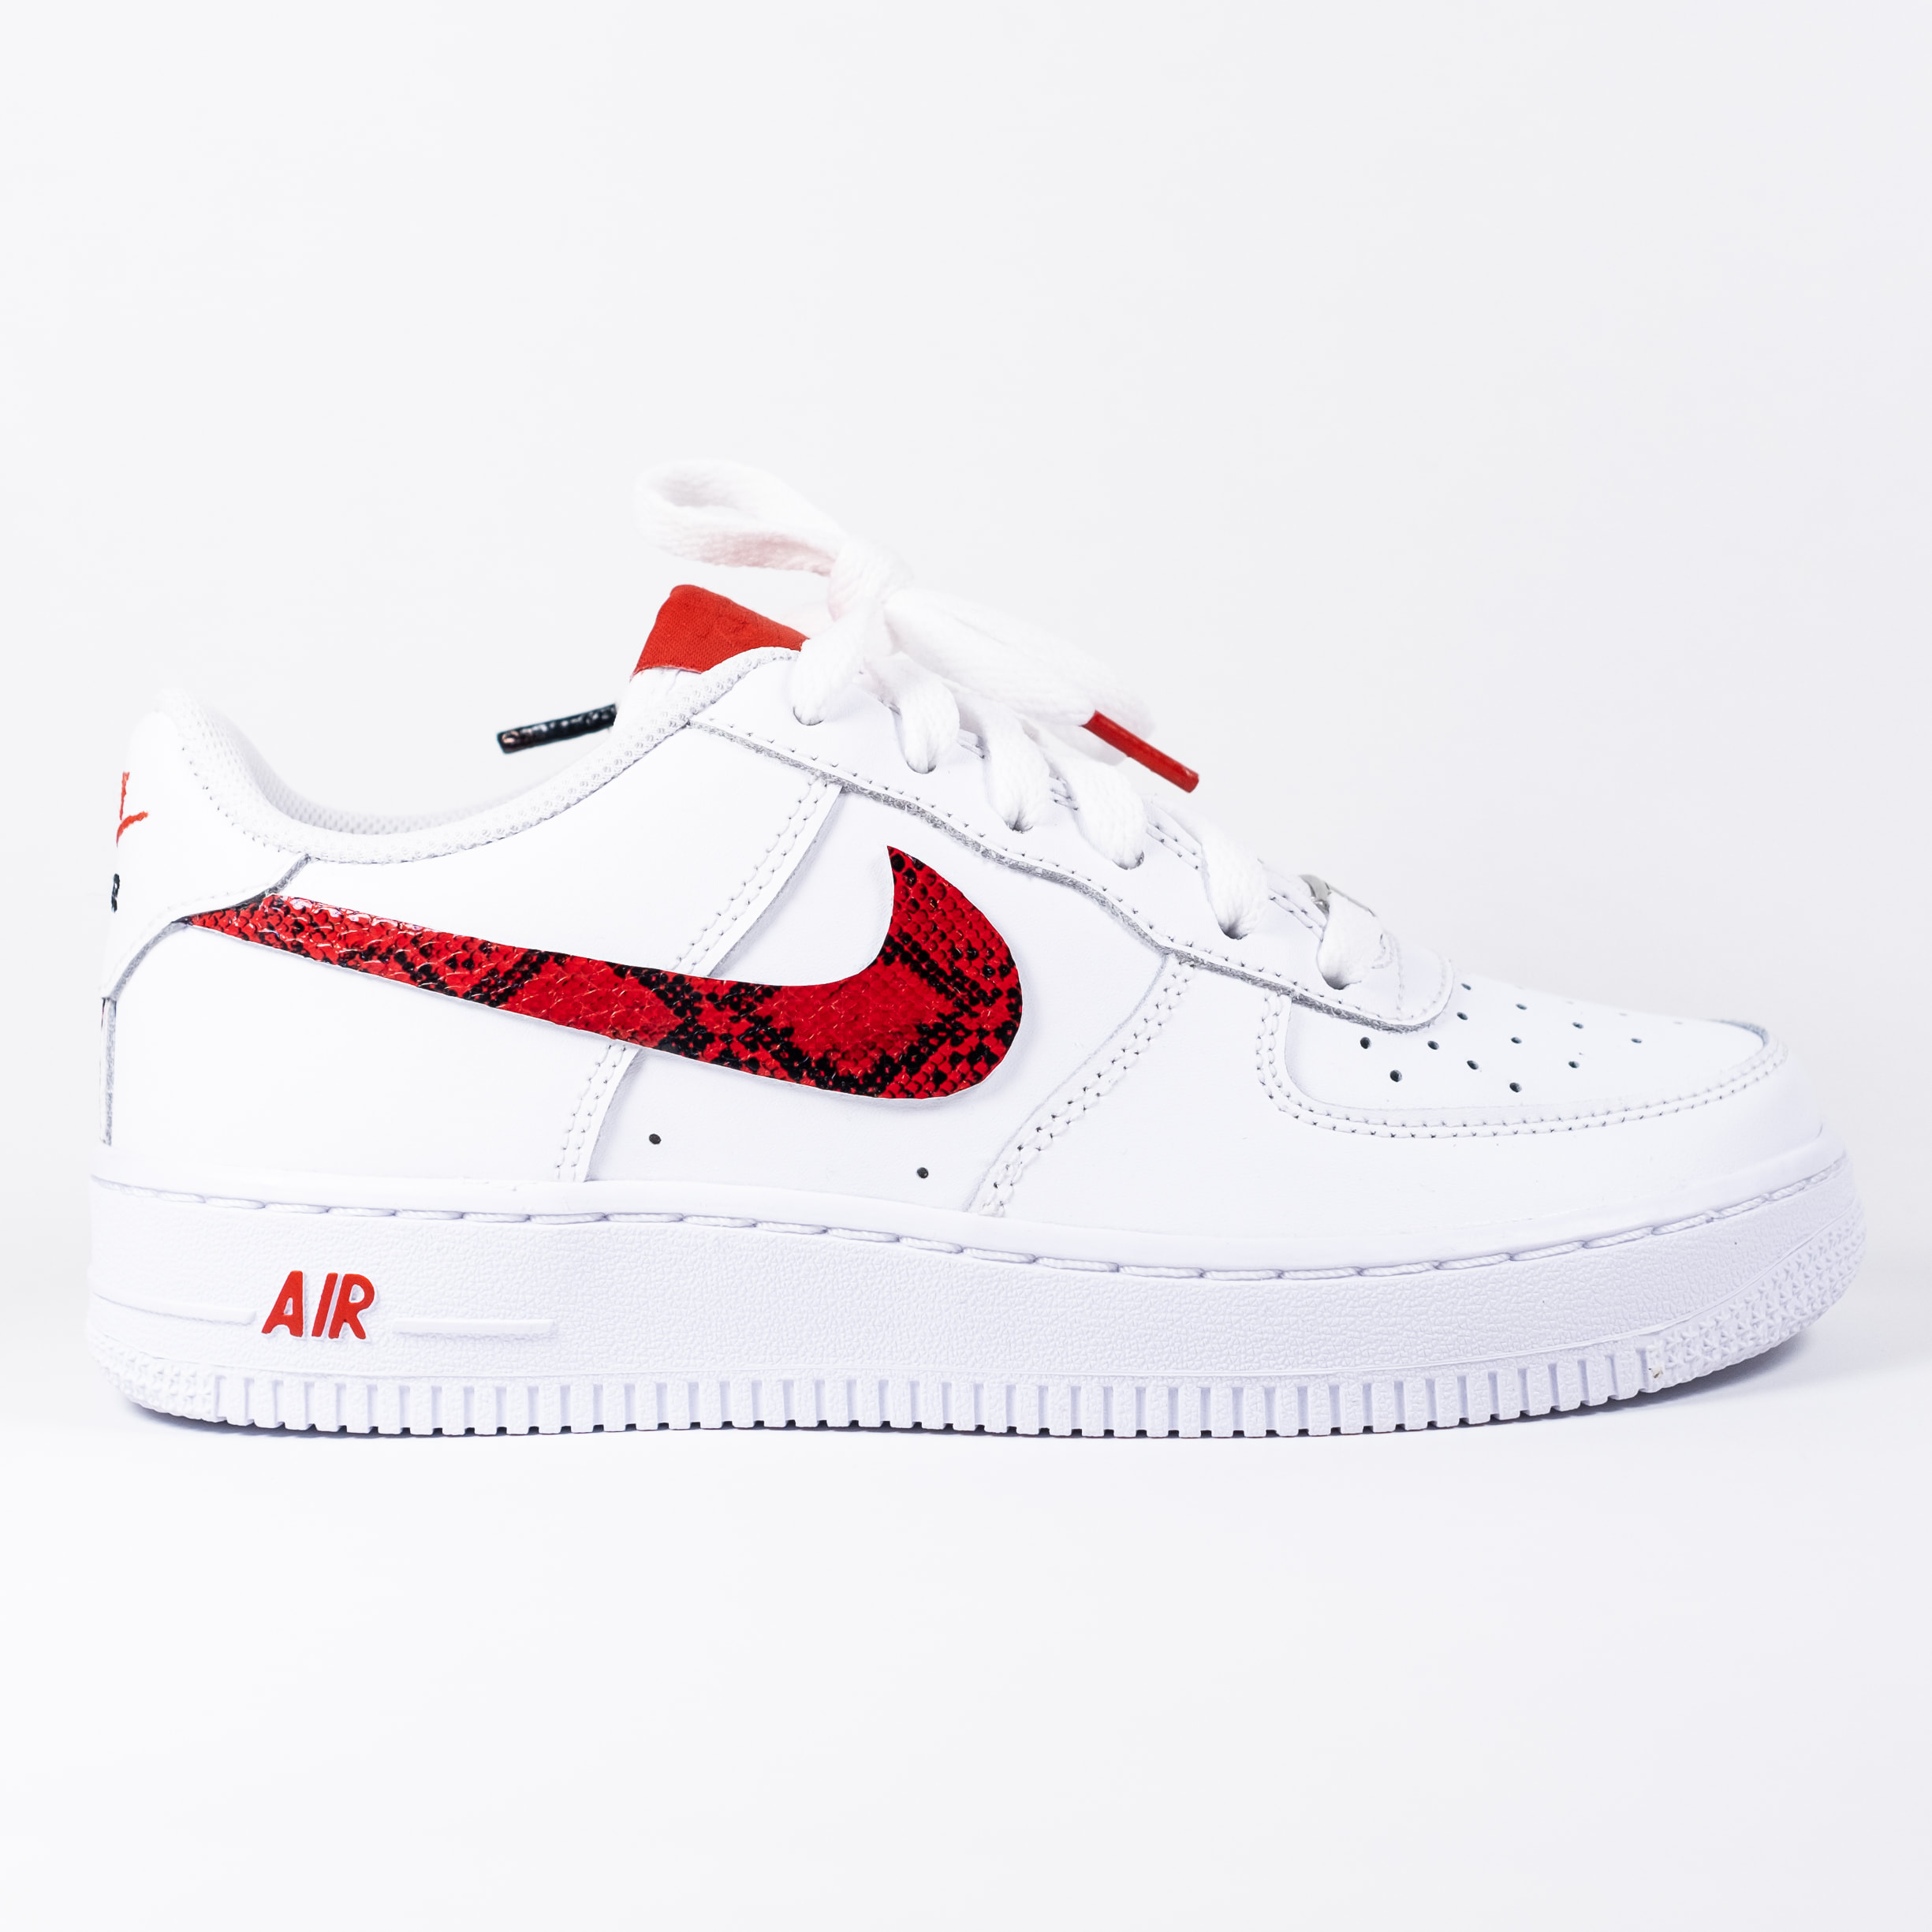 red and black air force 1s